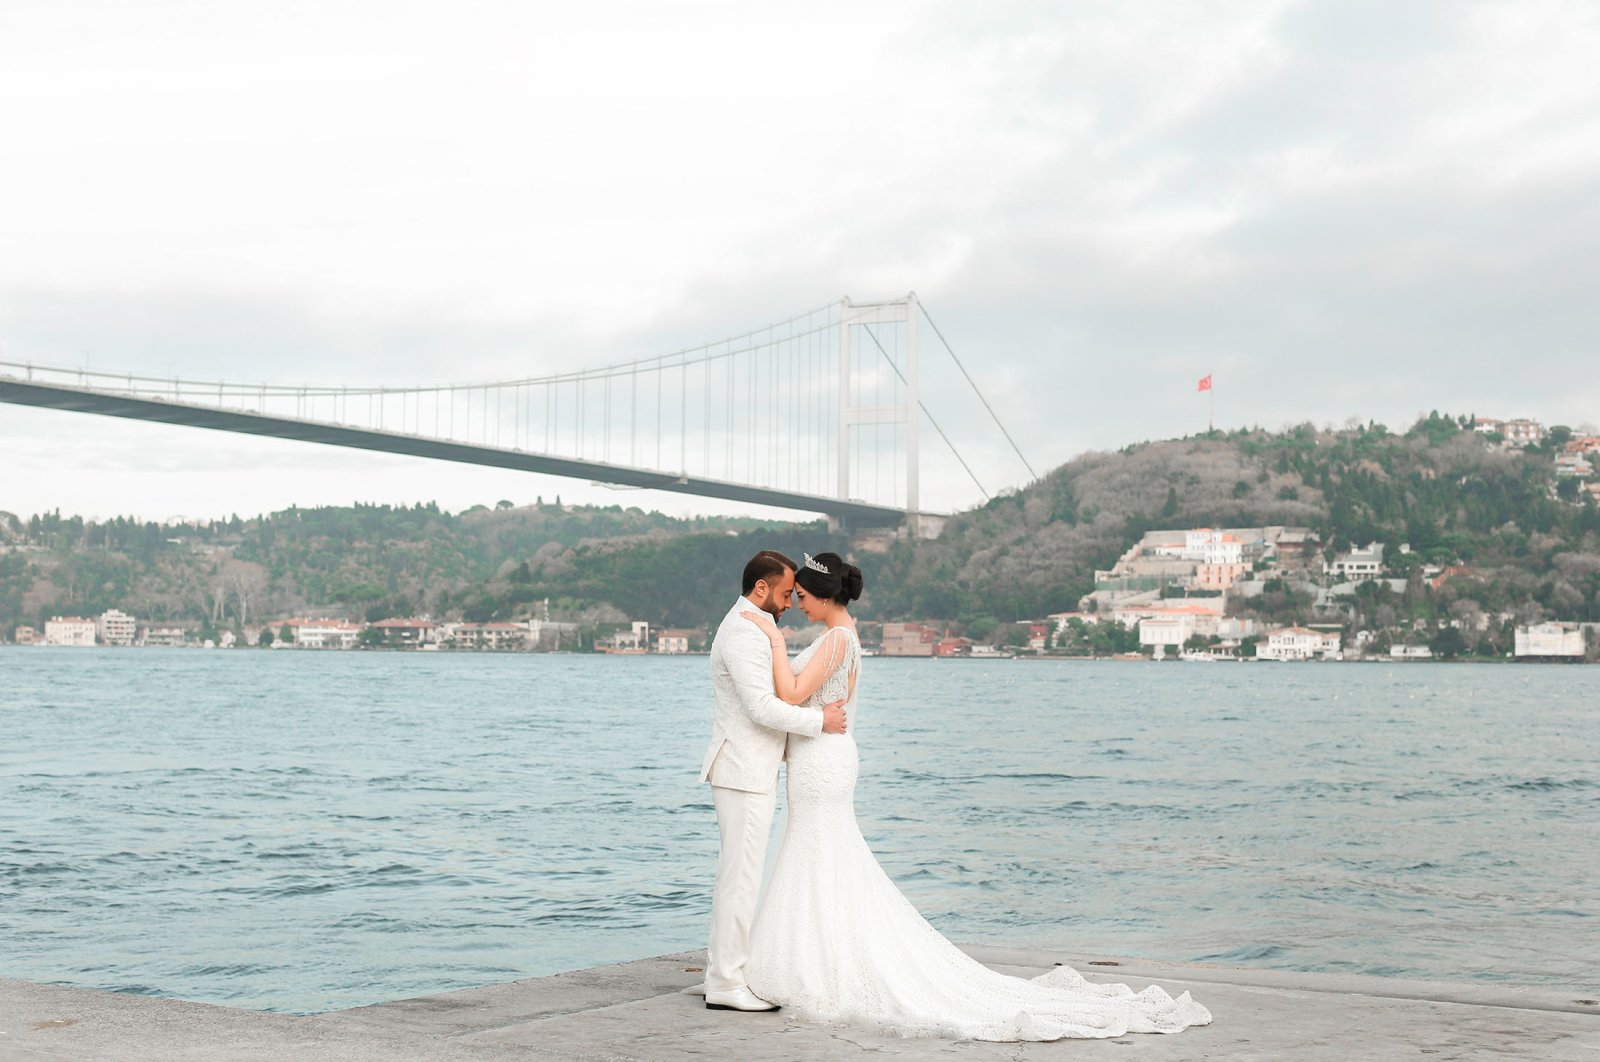 A newlywed couple poses with the Bosporus in the background, in Istanbul, Türkiye, Feb. 20, 2021. (Shutterstock Photo)